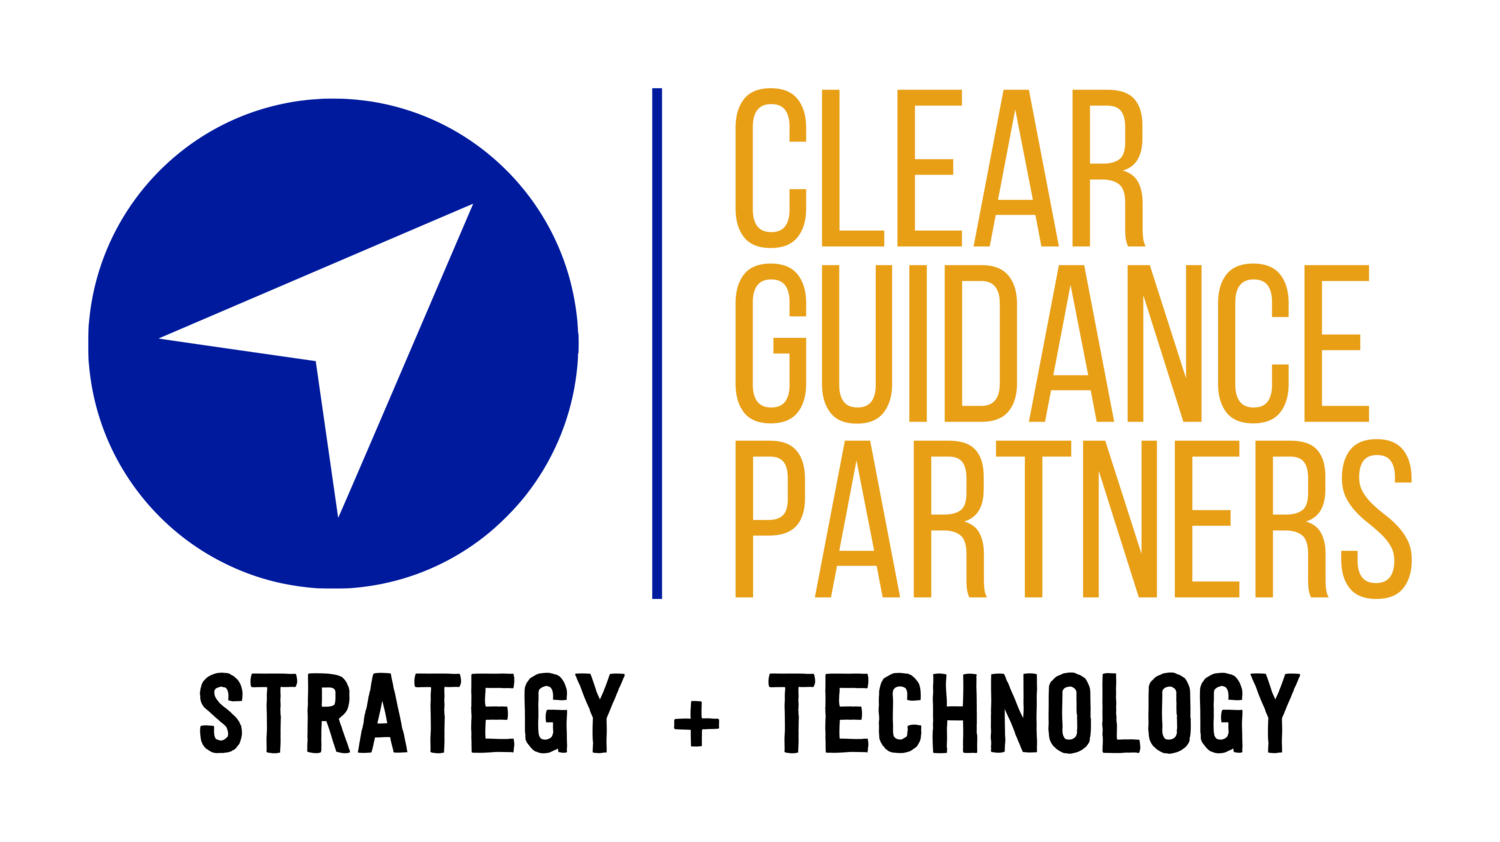 CLEAR GUIDANCE PARTNERS